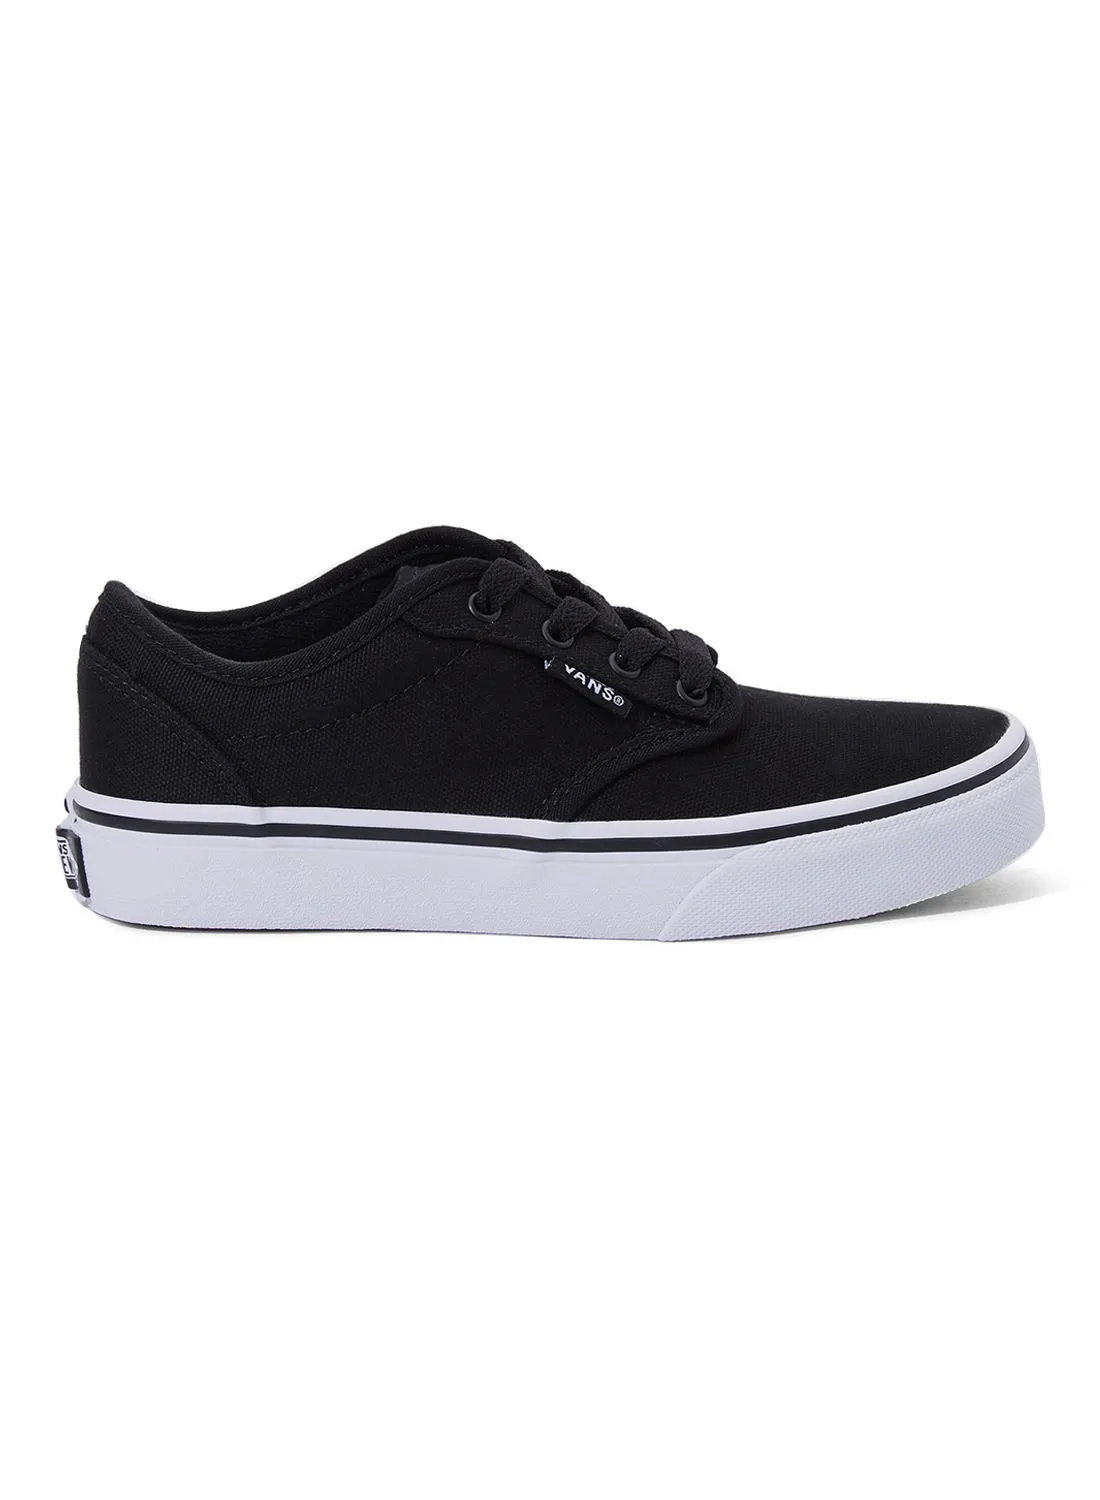 VANS Atwood Low Top Sneakers (CANVAS) BLACK/WHITE